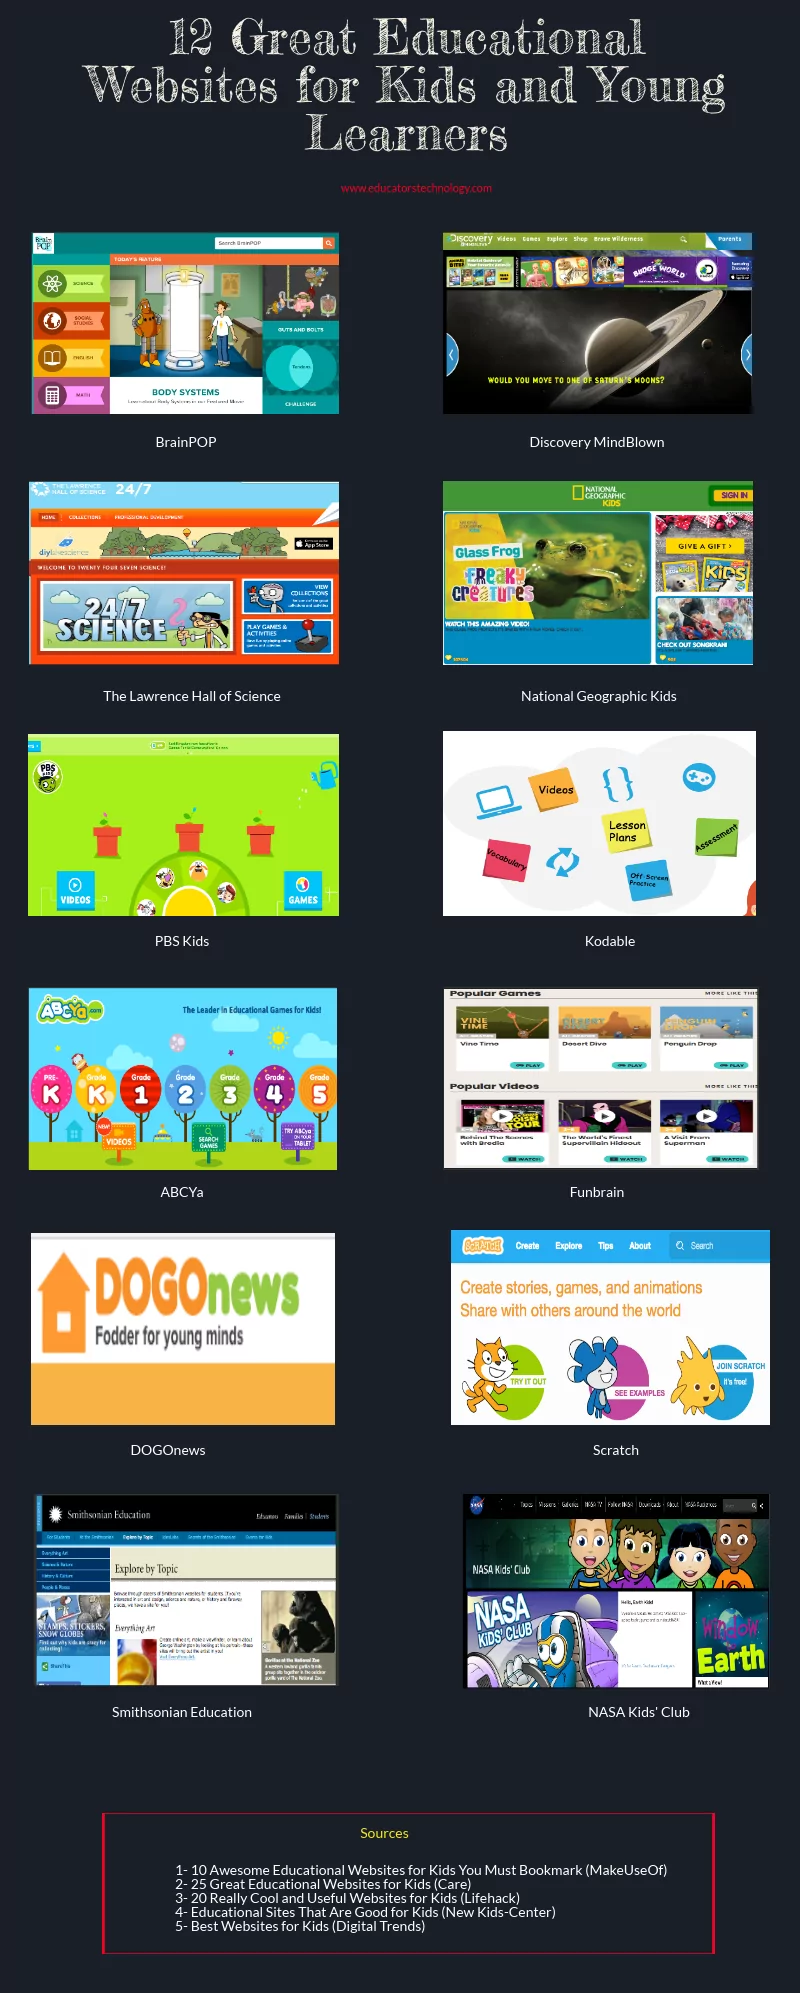 12 Geat Educational Websites for Kids and Young Learners